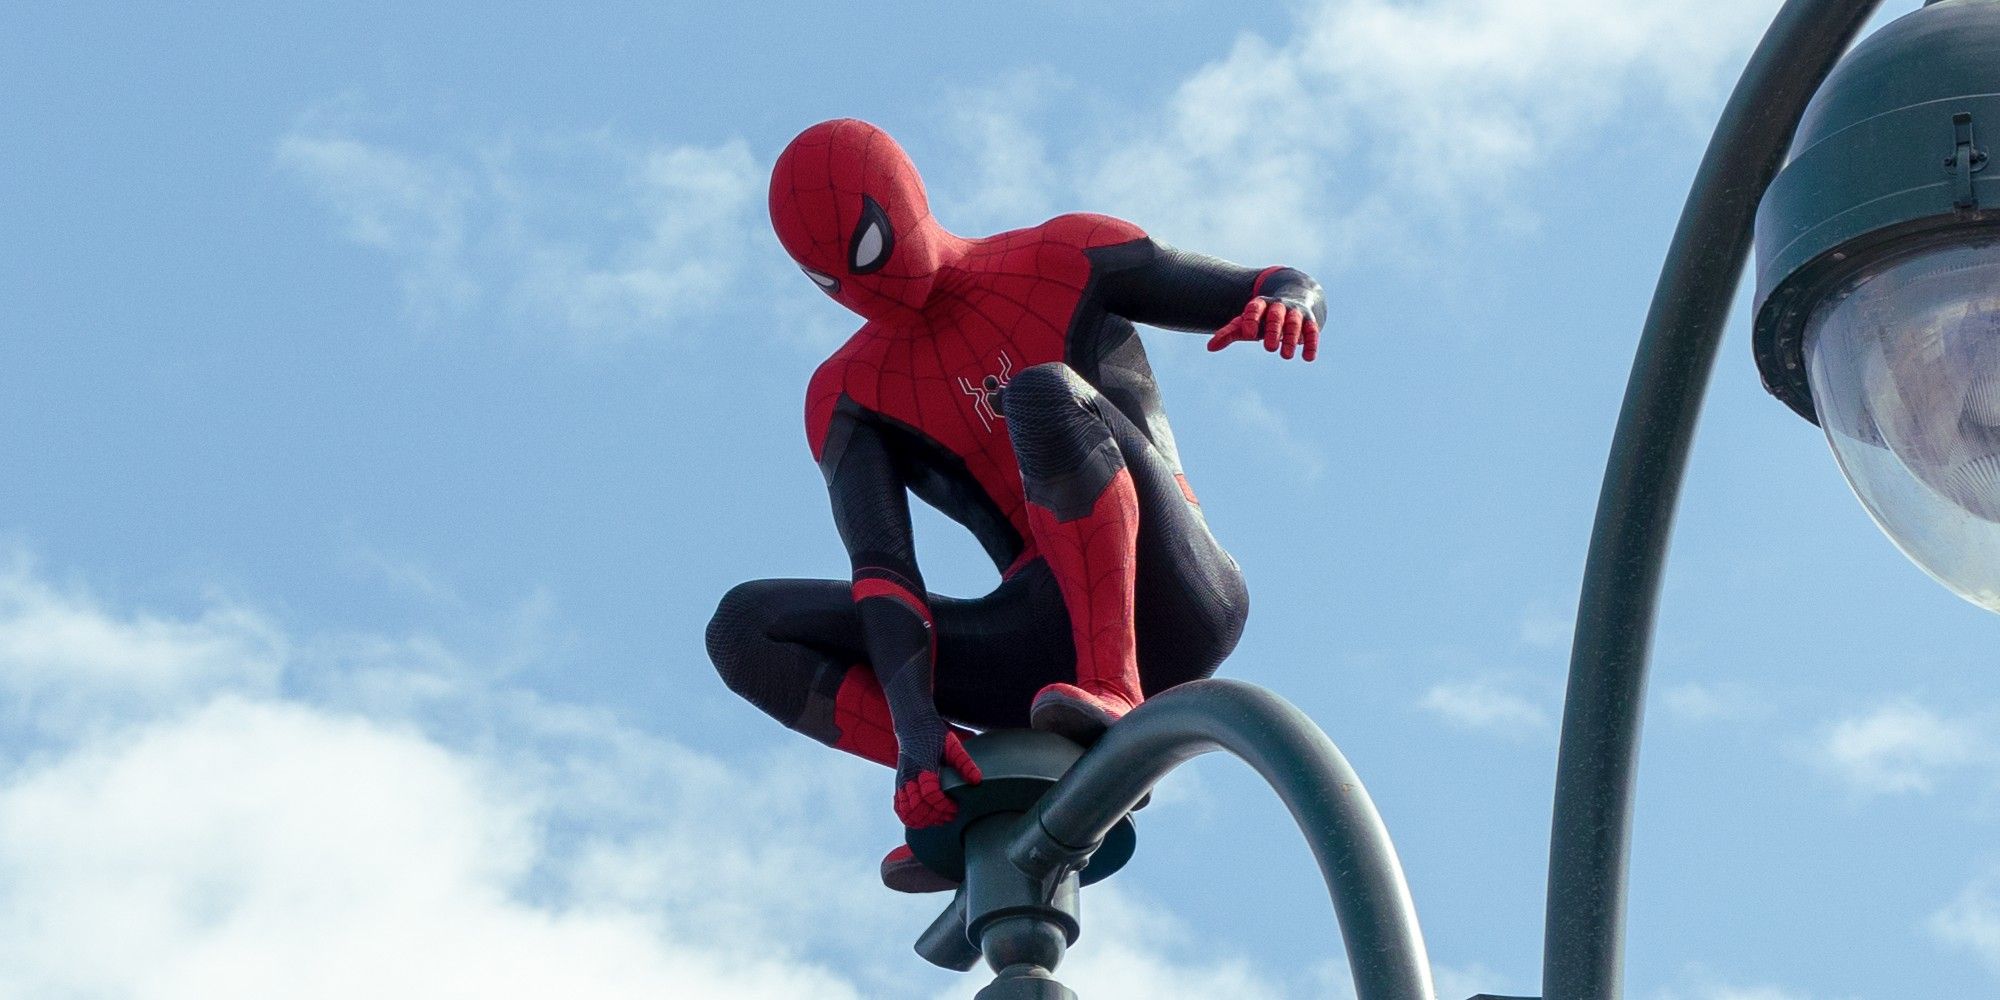 Spider-Man on a lamppost in No Way Home 